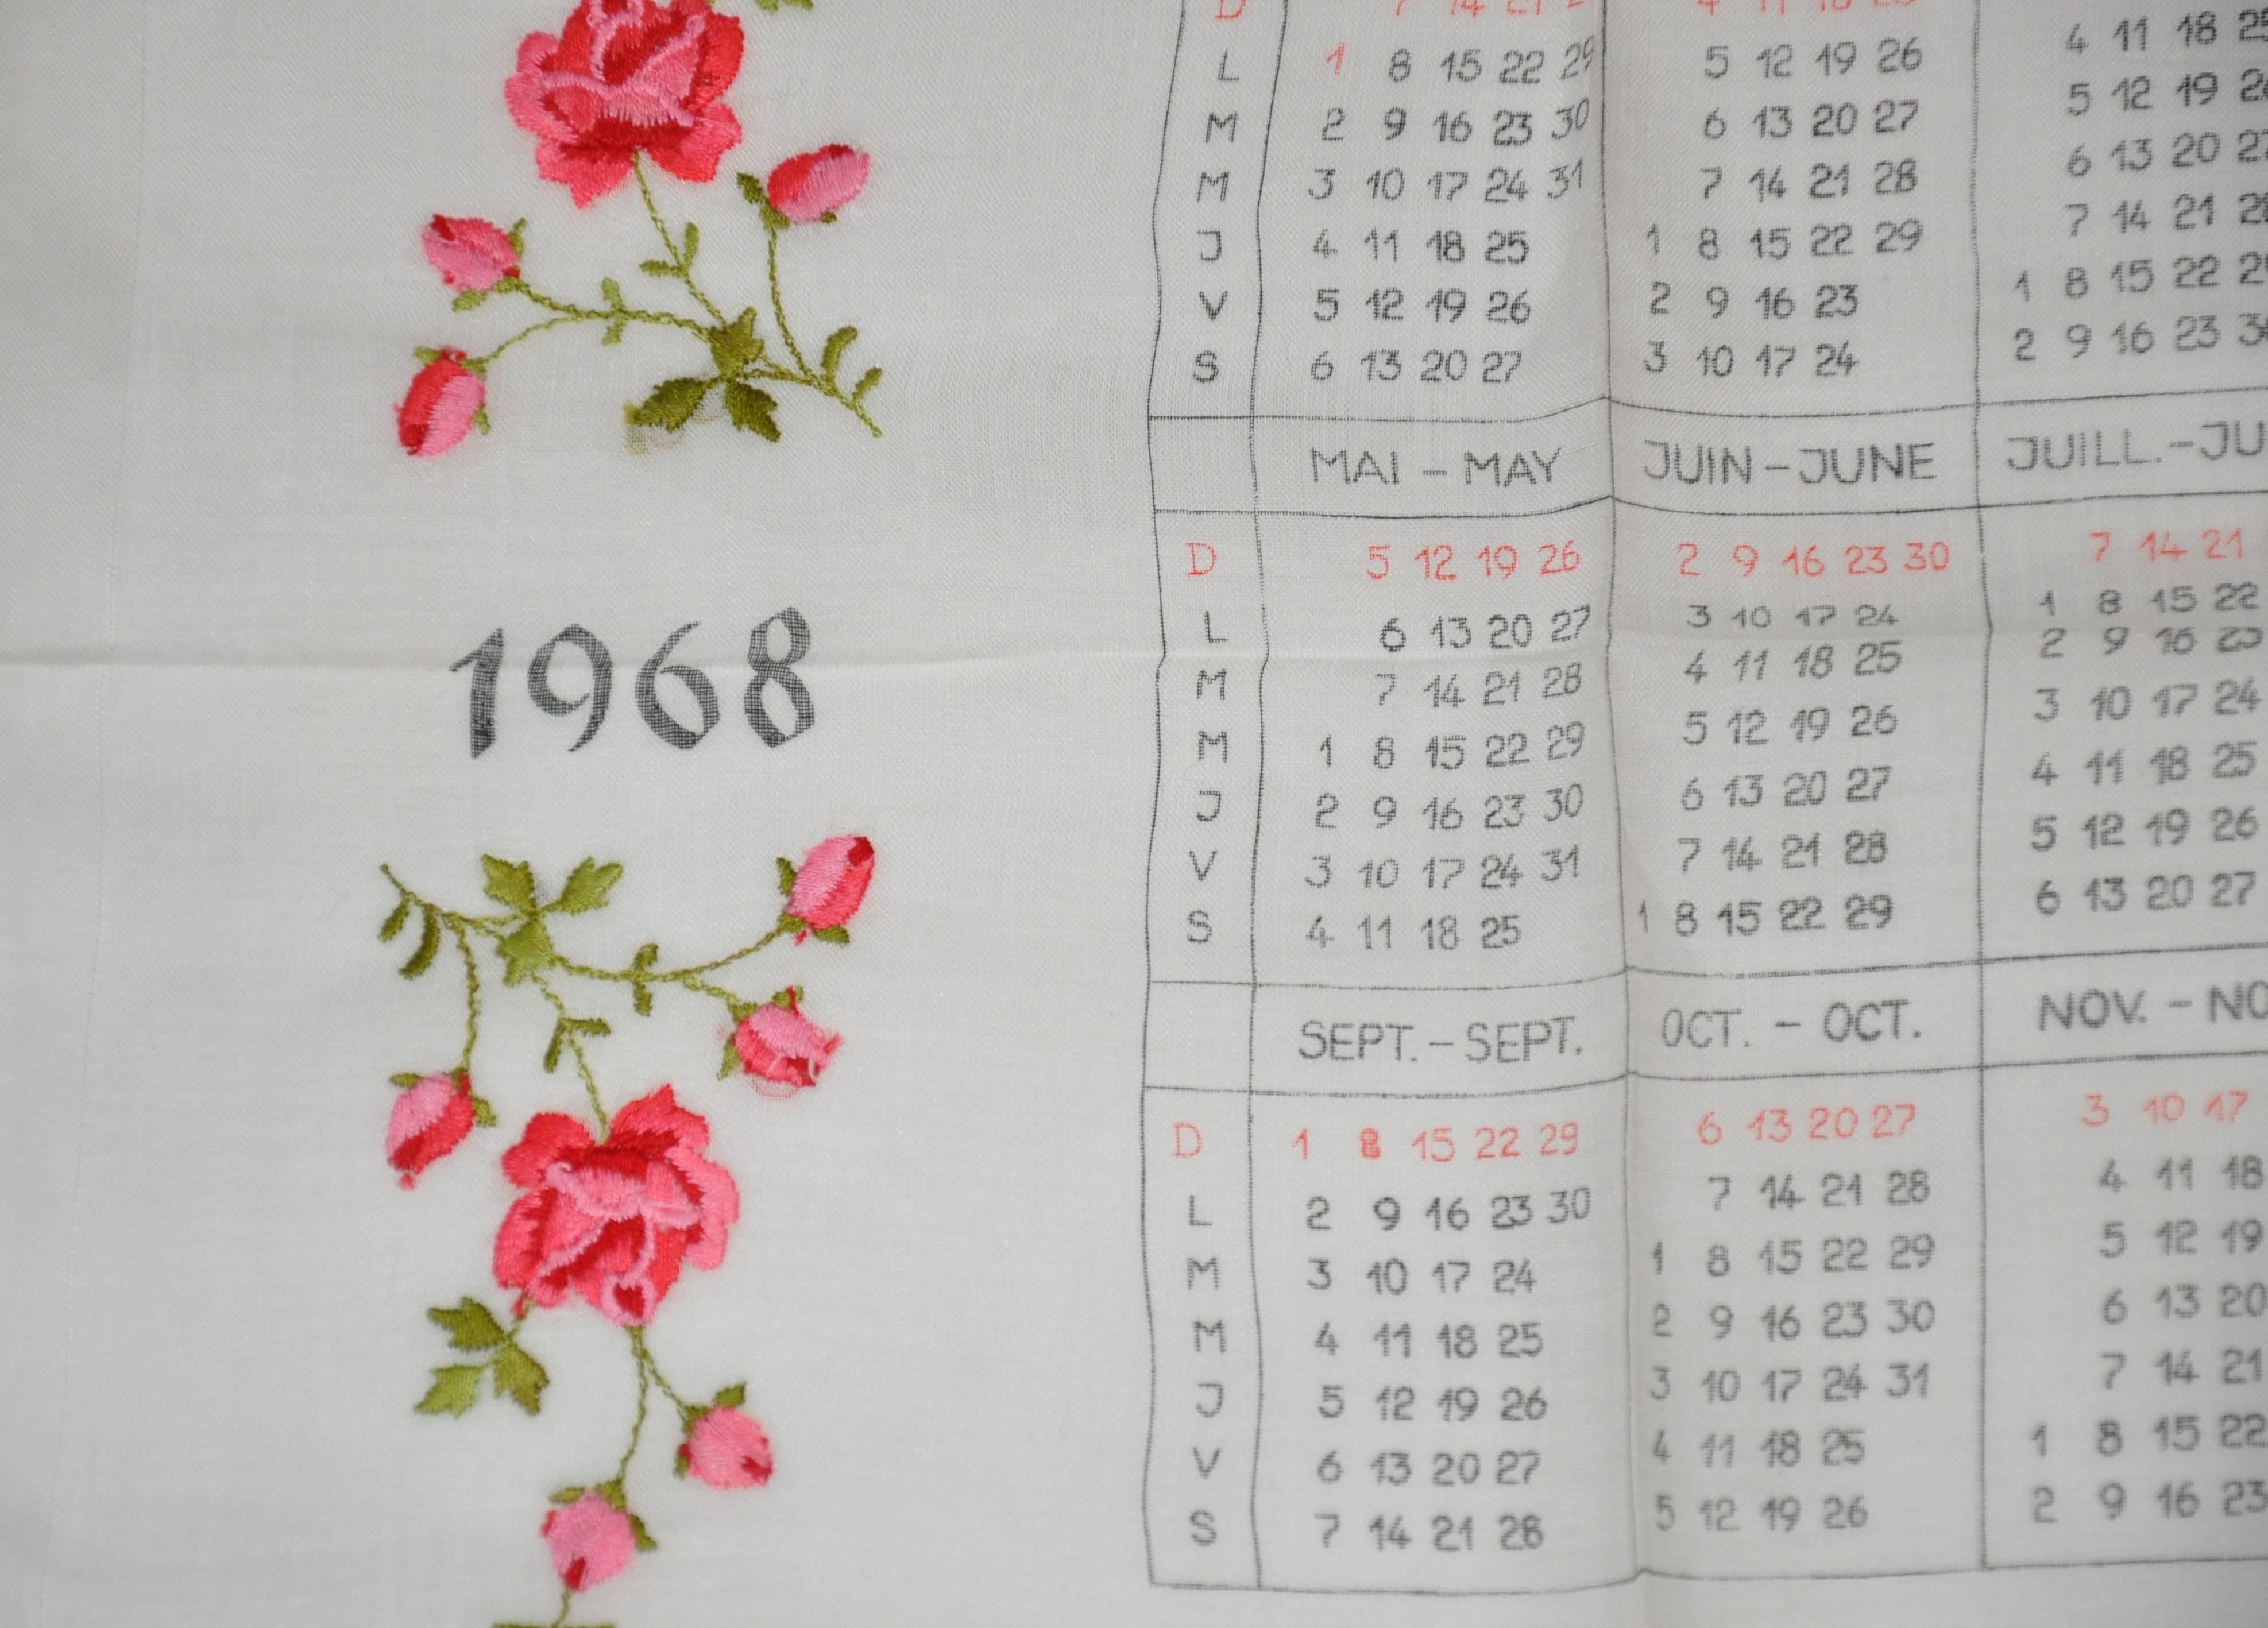 "1968" calendar cotton handkerchief measures 12" x 12" with hand-stitched edges. Made in USA.